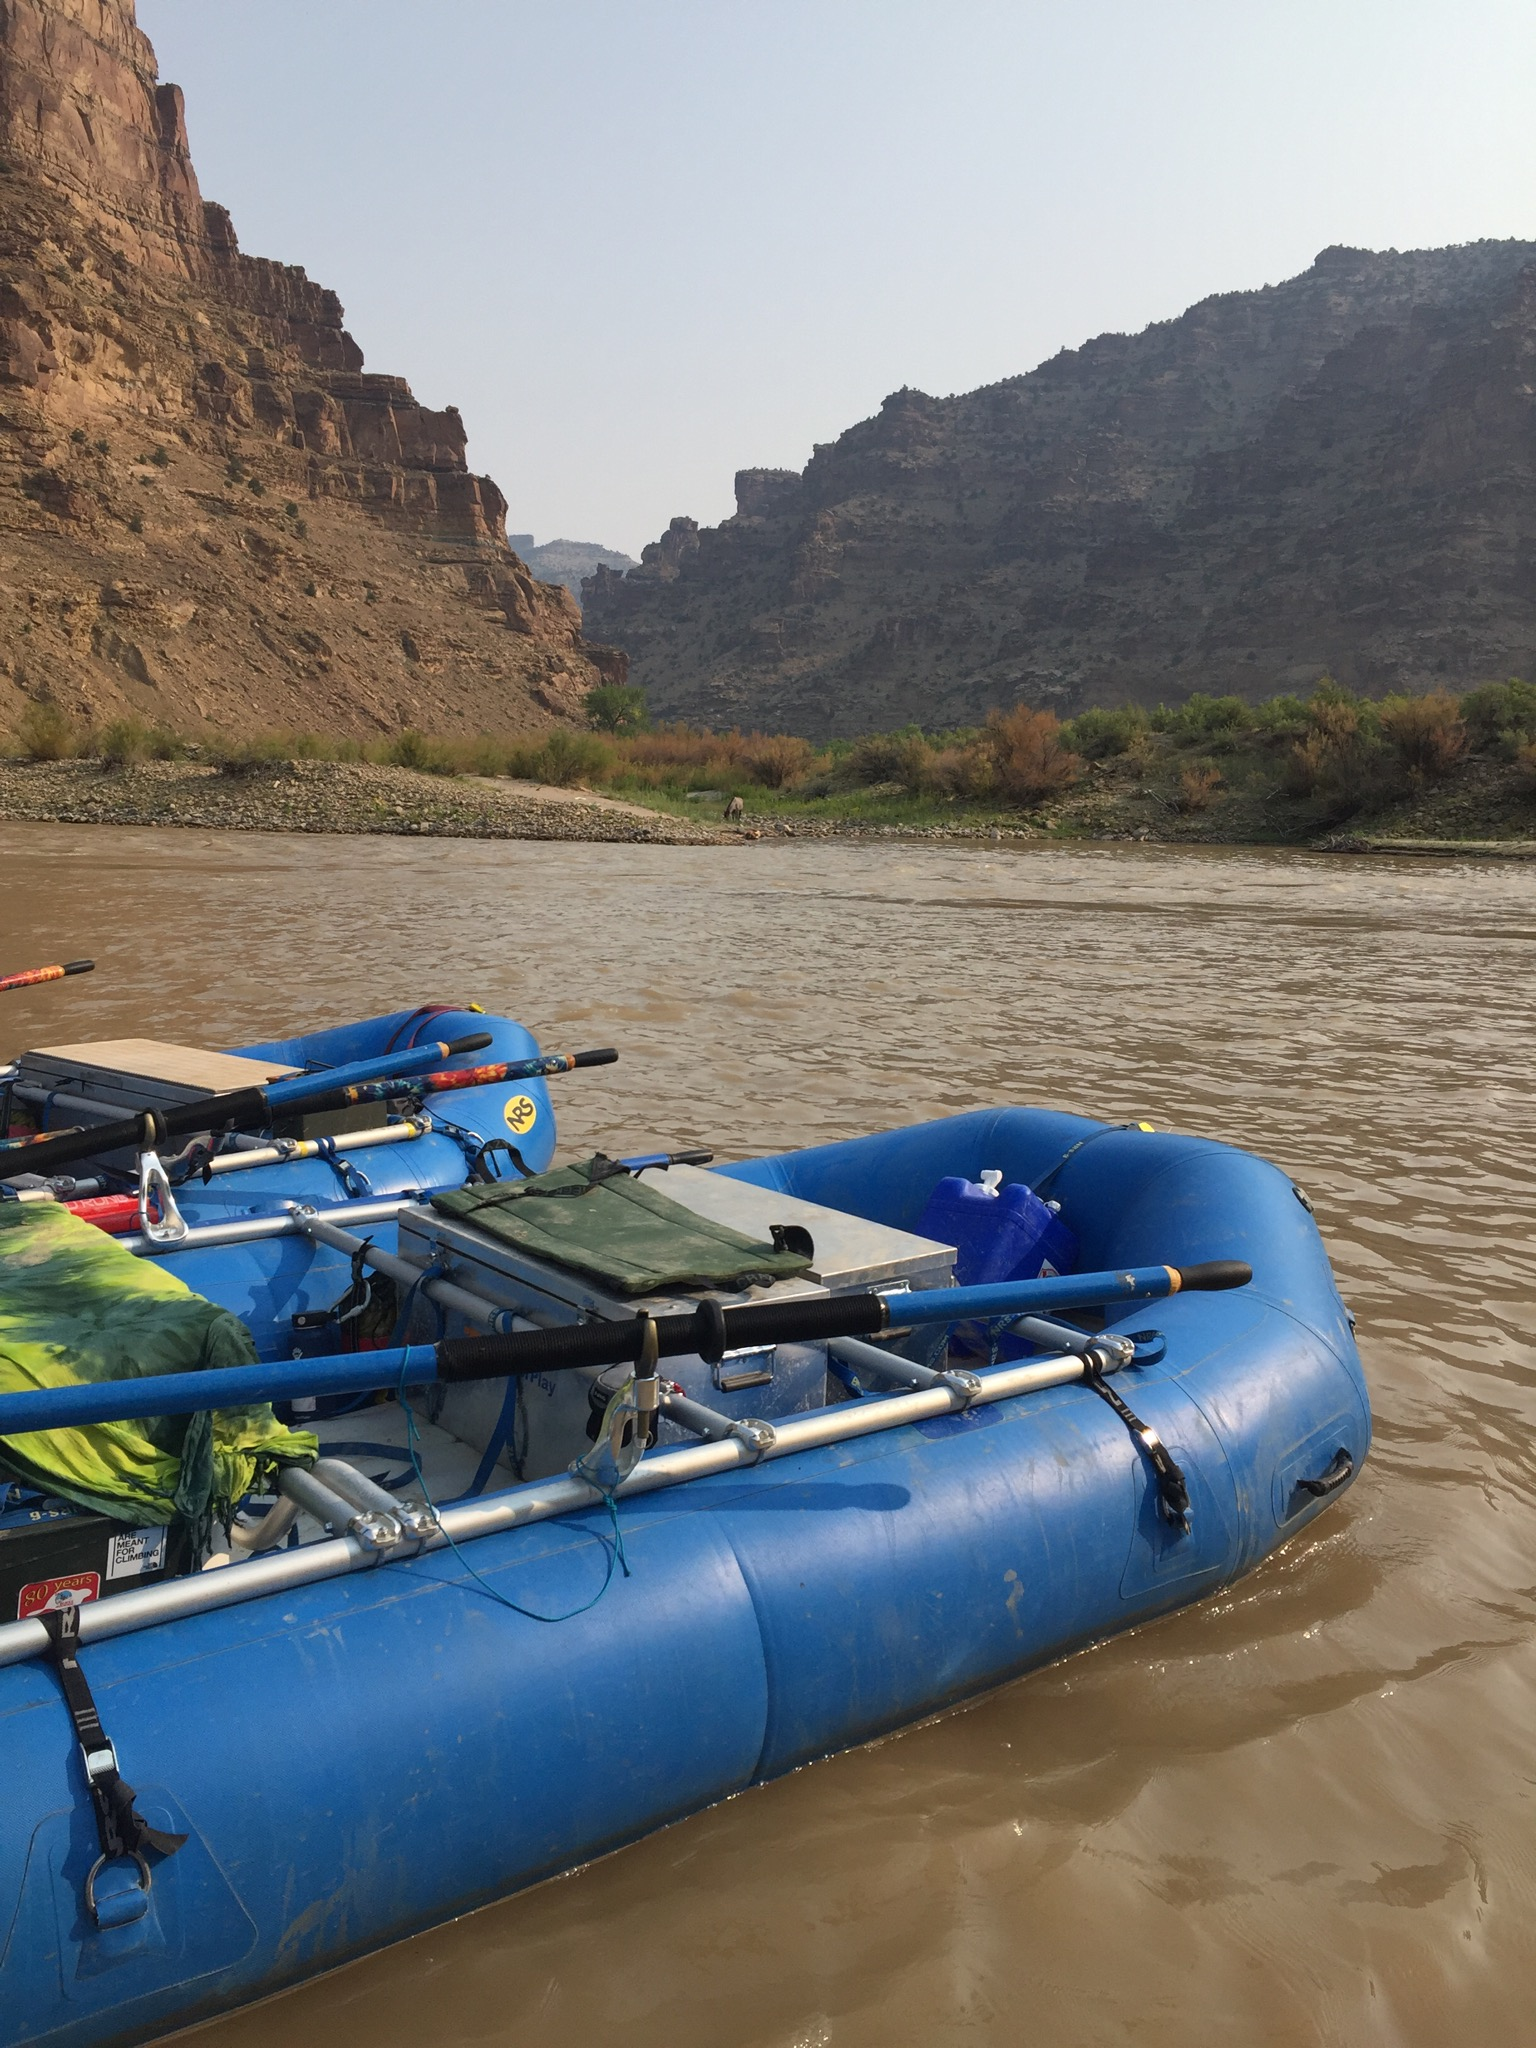 Two rafts near the entrance of the canyon. Photo by Ali Waller